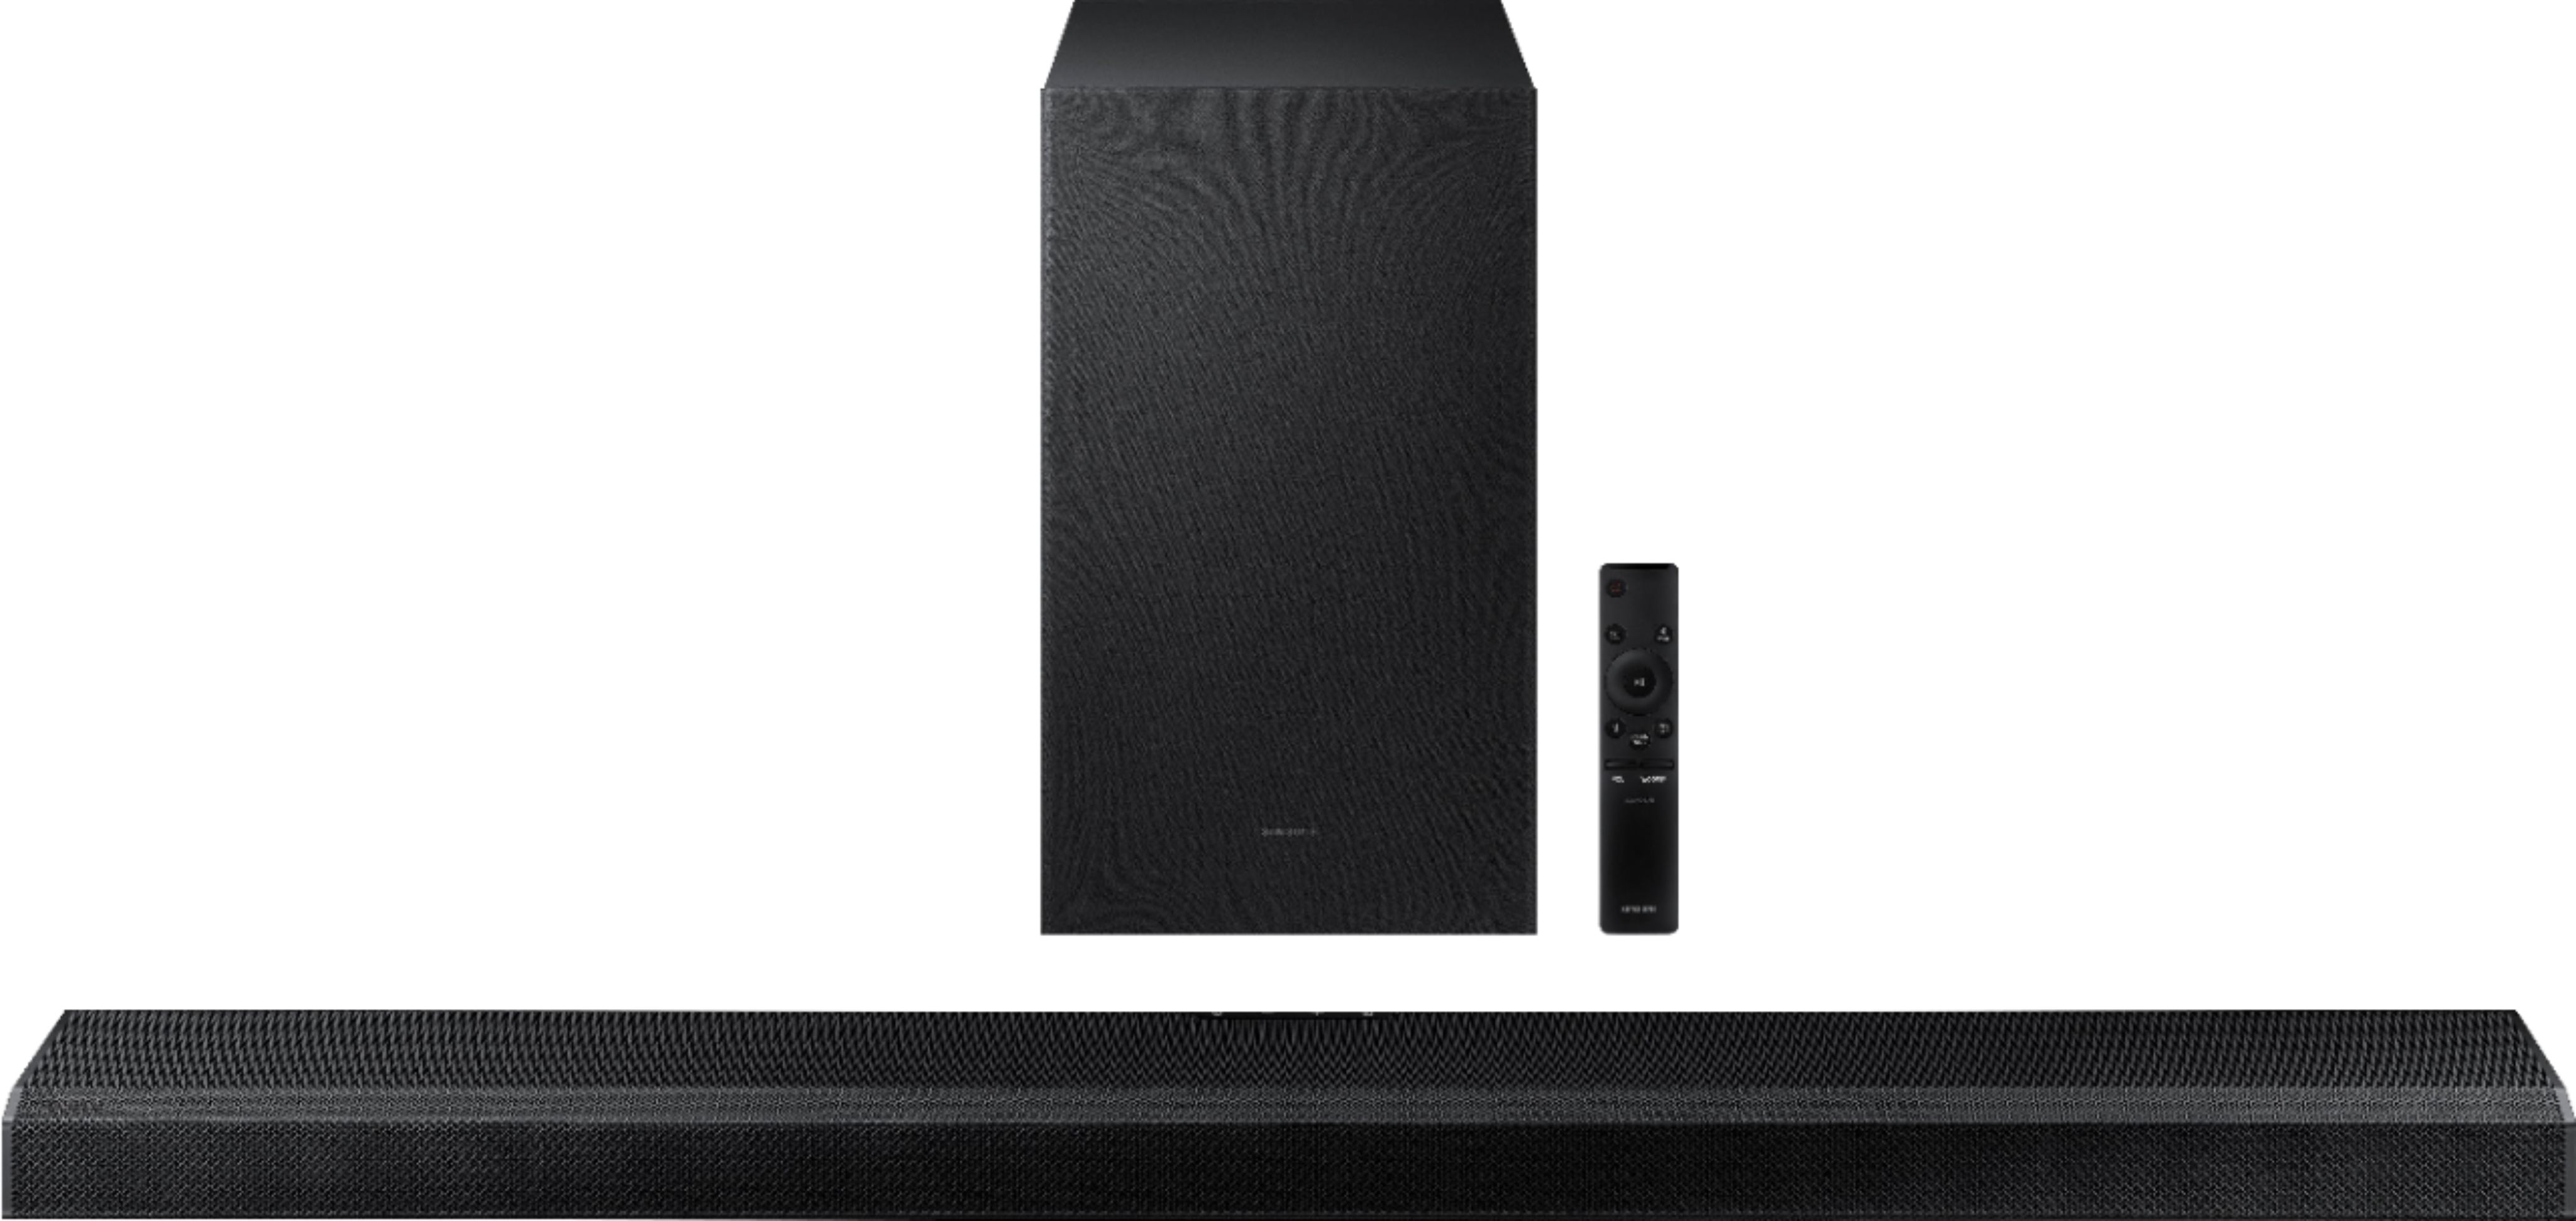 Samsung 3.1.2-Channel Soundbar with Wireless Subwoofer, Dolby and Assistant Black HW-Q700A/ZA - Best Buy